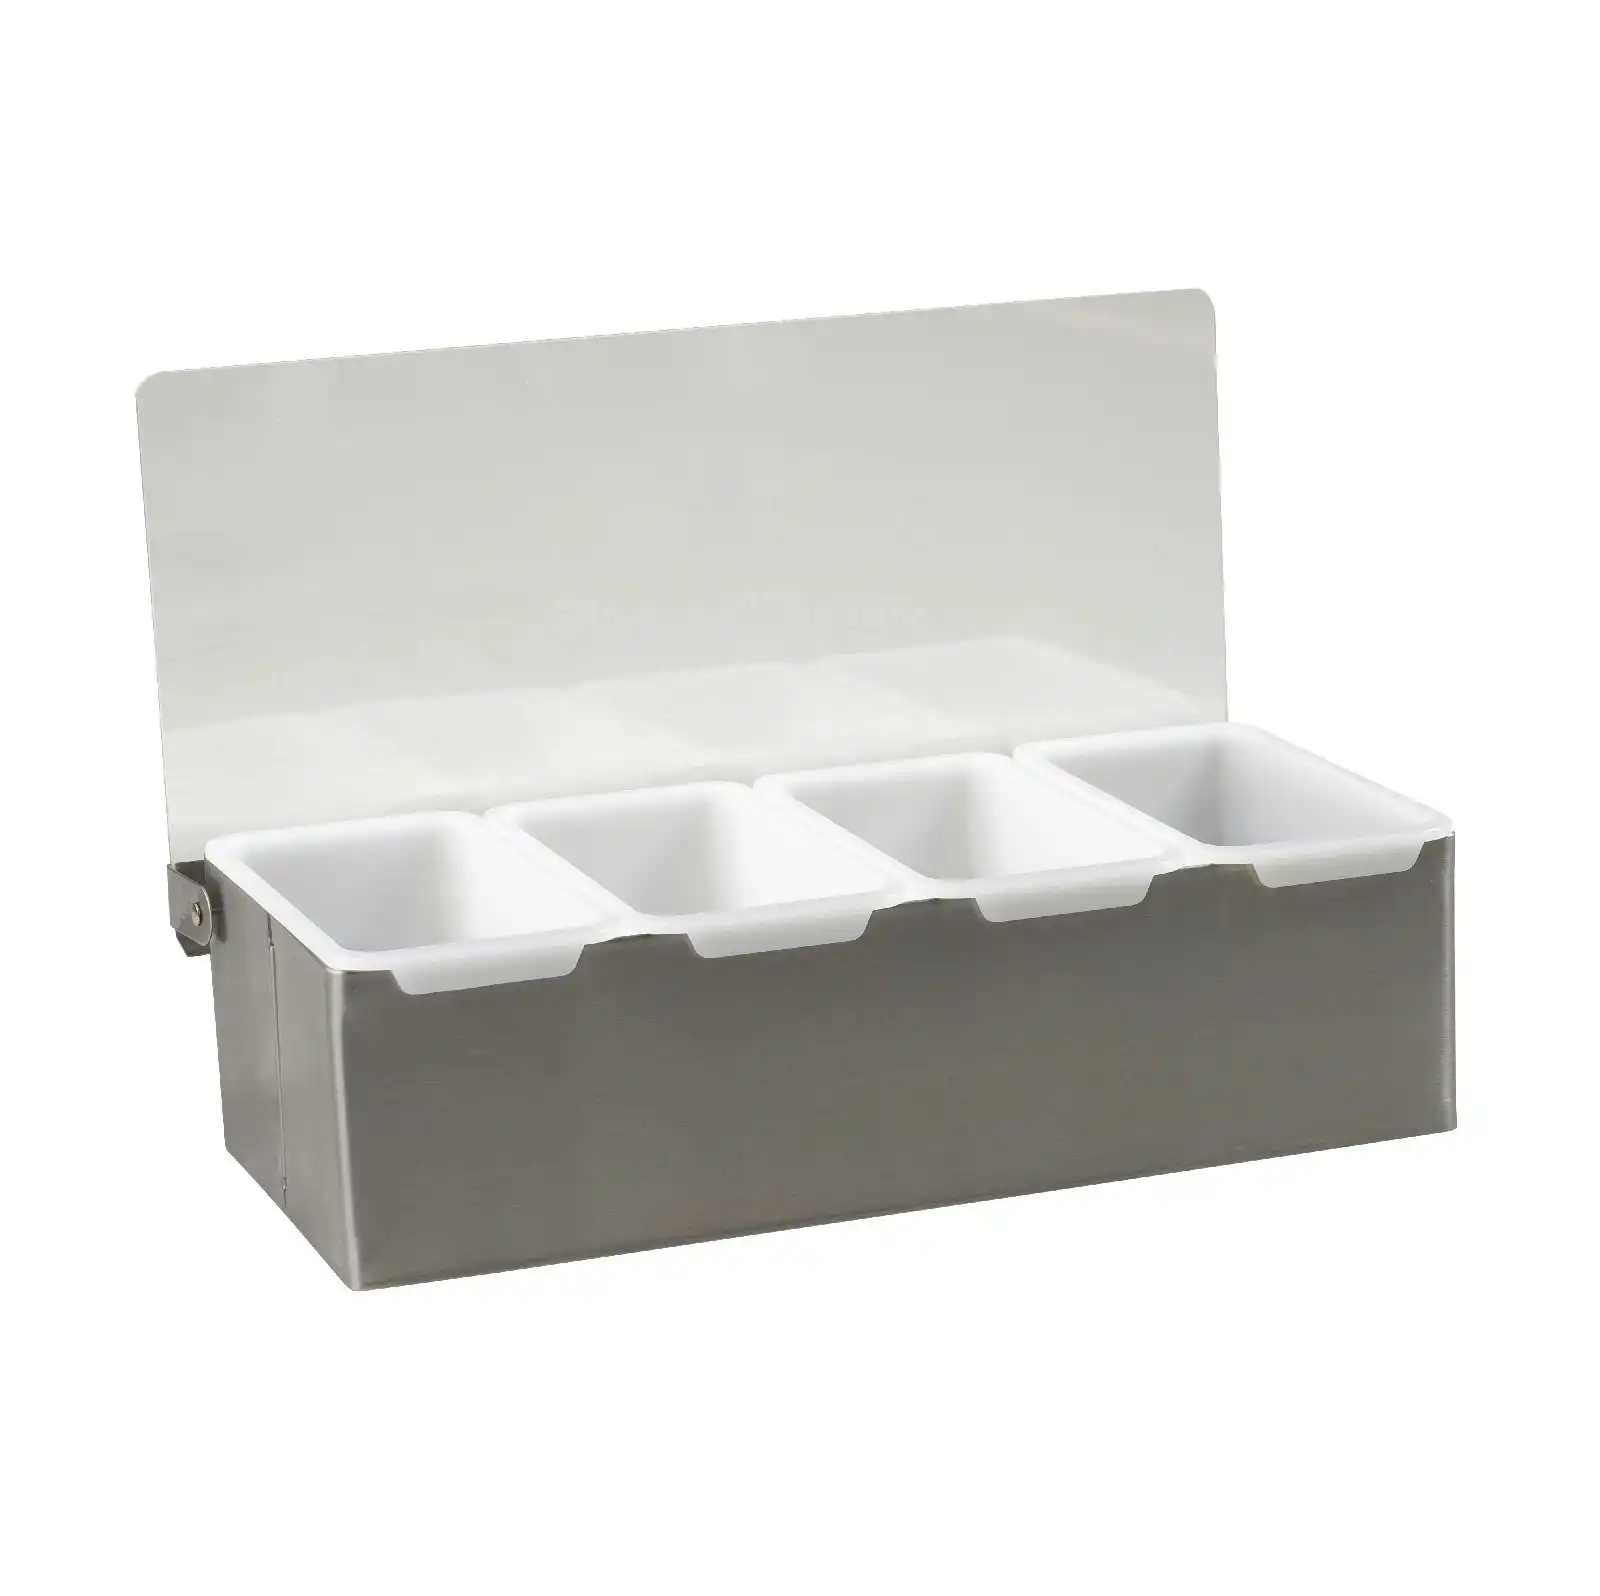 Cocktail Bar 4 Compartment Condiment Dispenser   Stainless Steel And Plastic